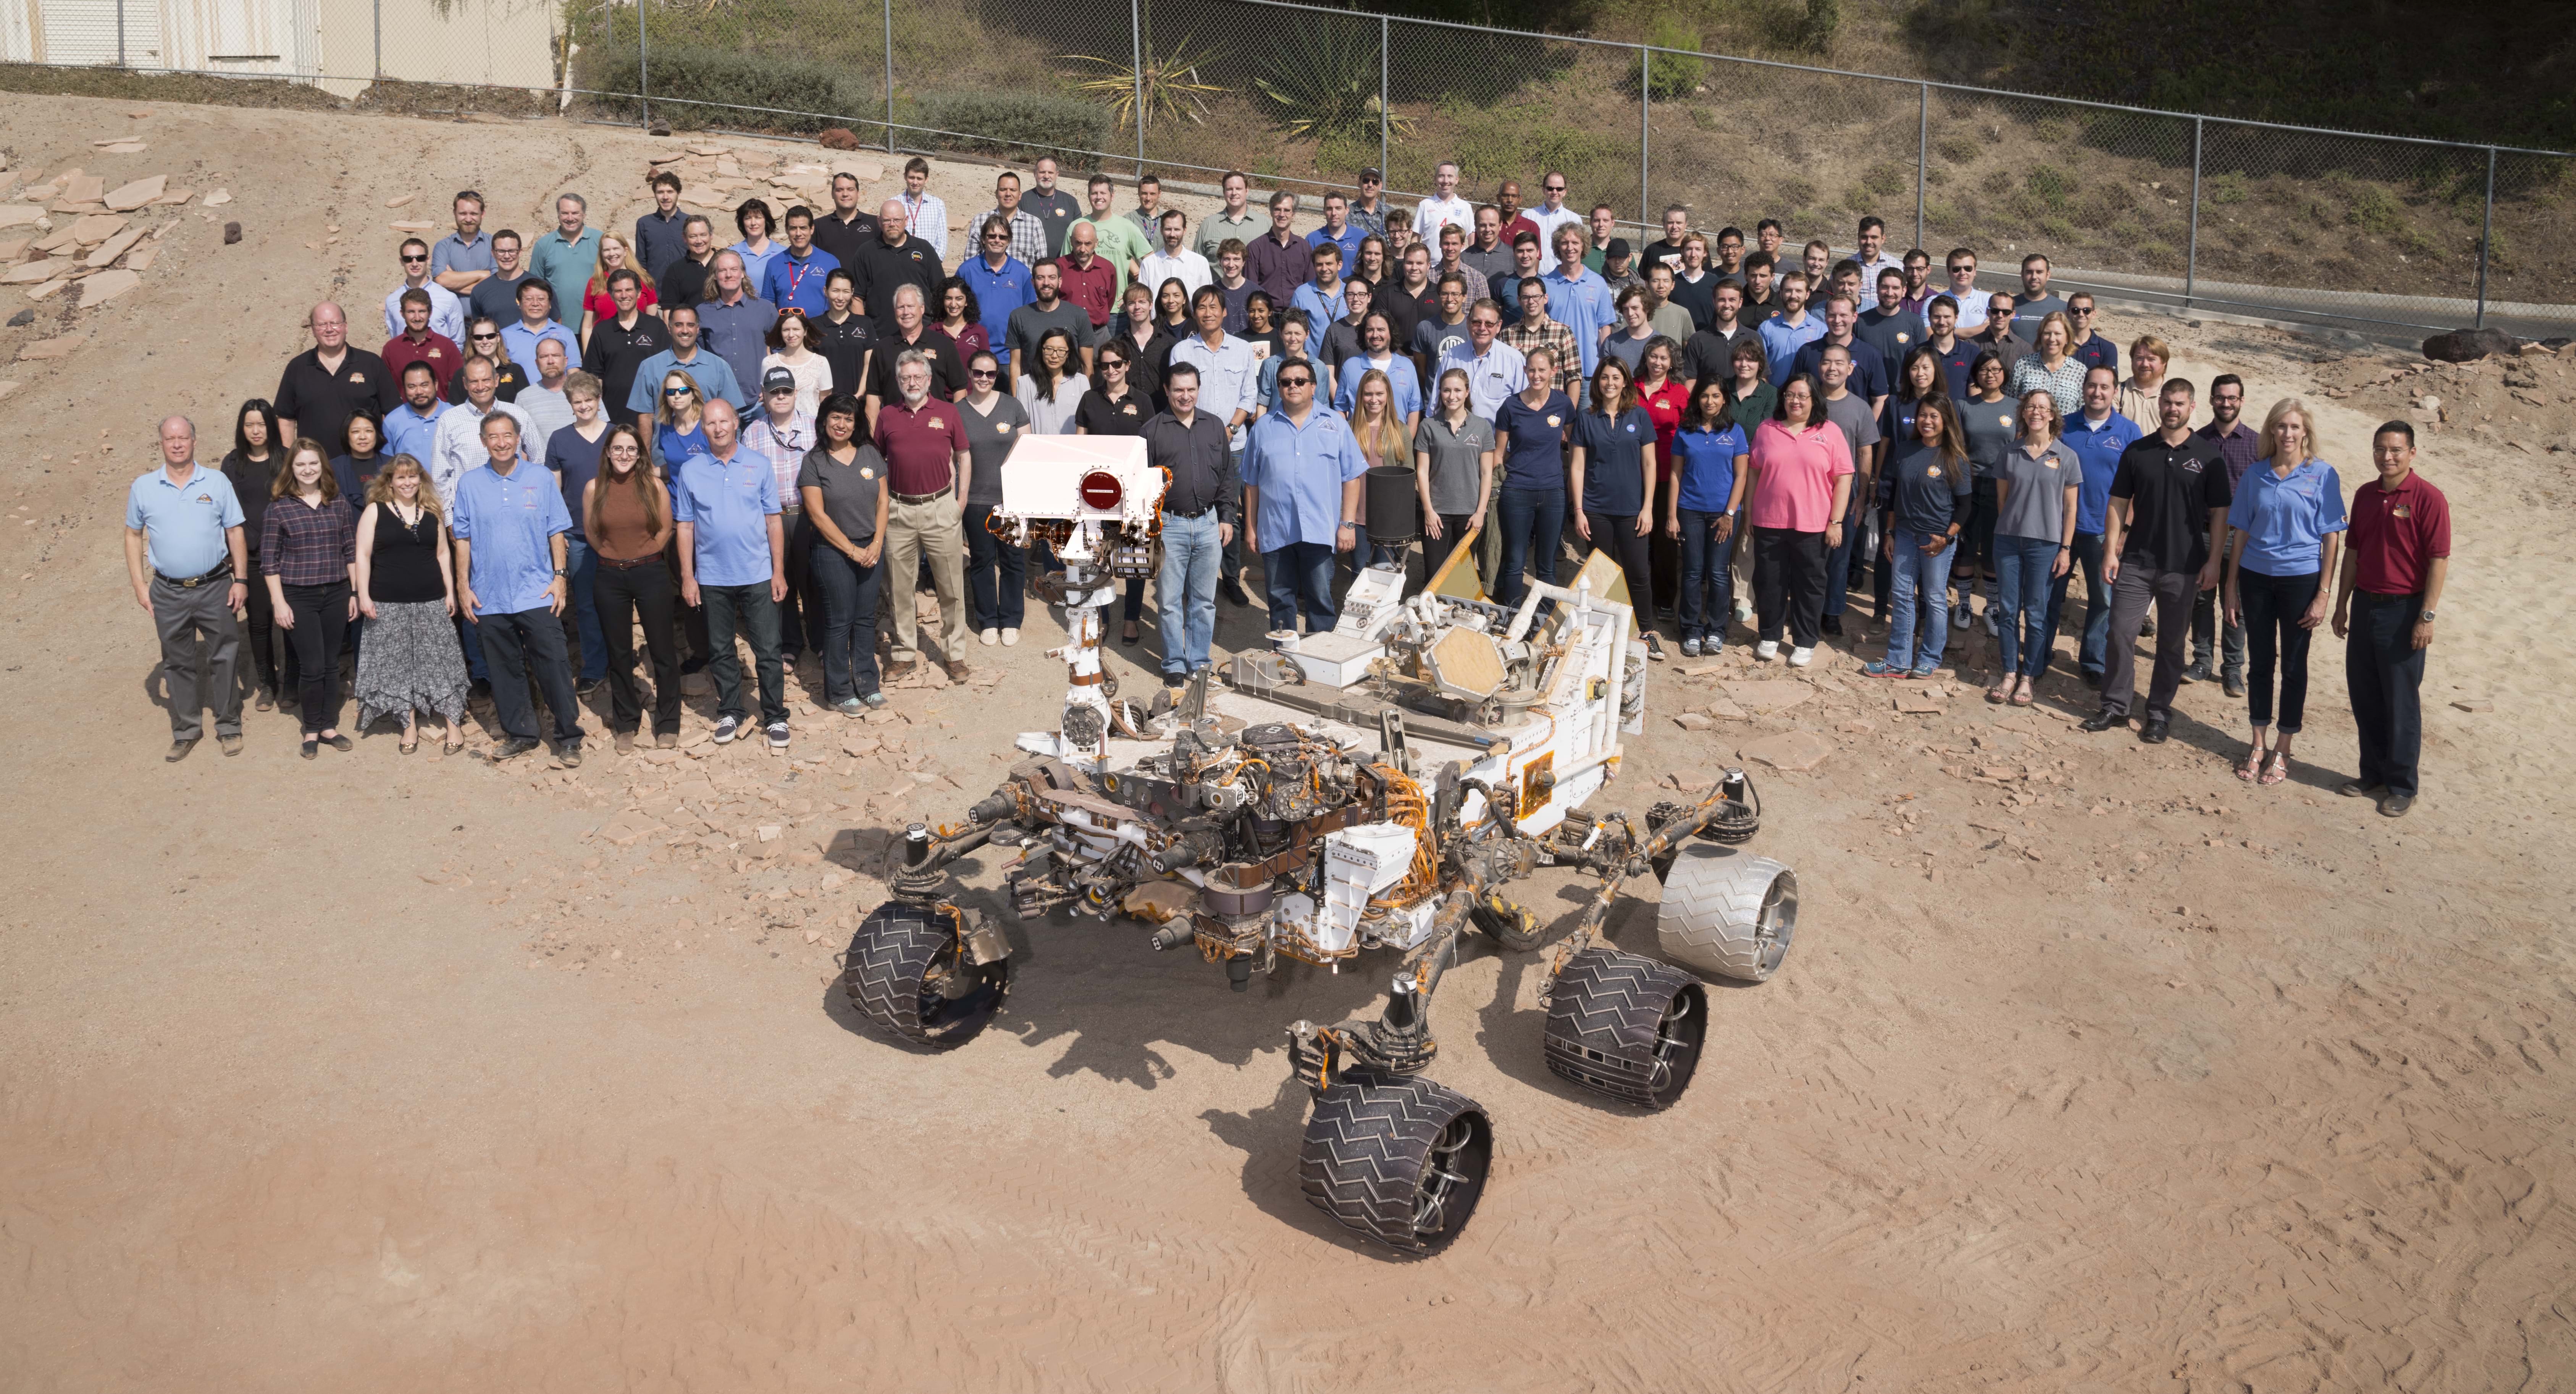 Mars rover model of Curiosity with its team 